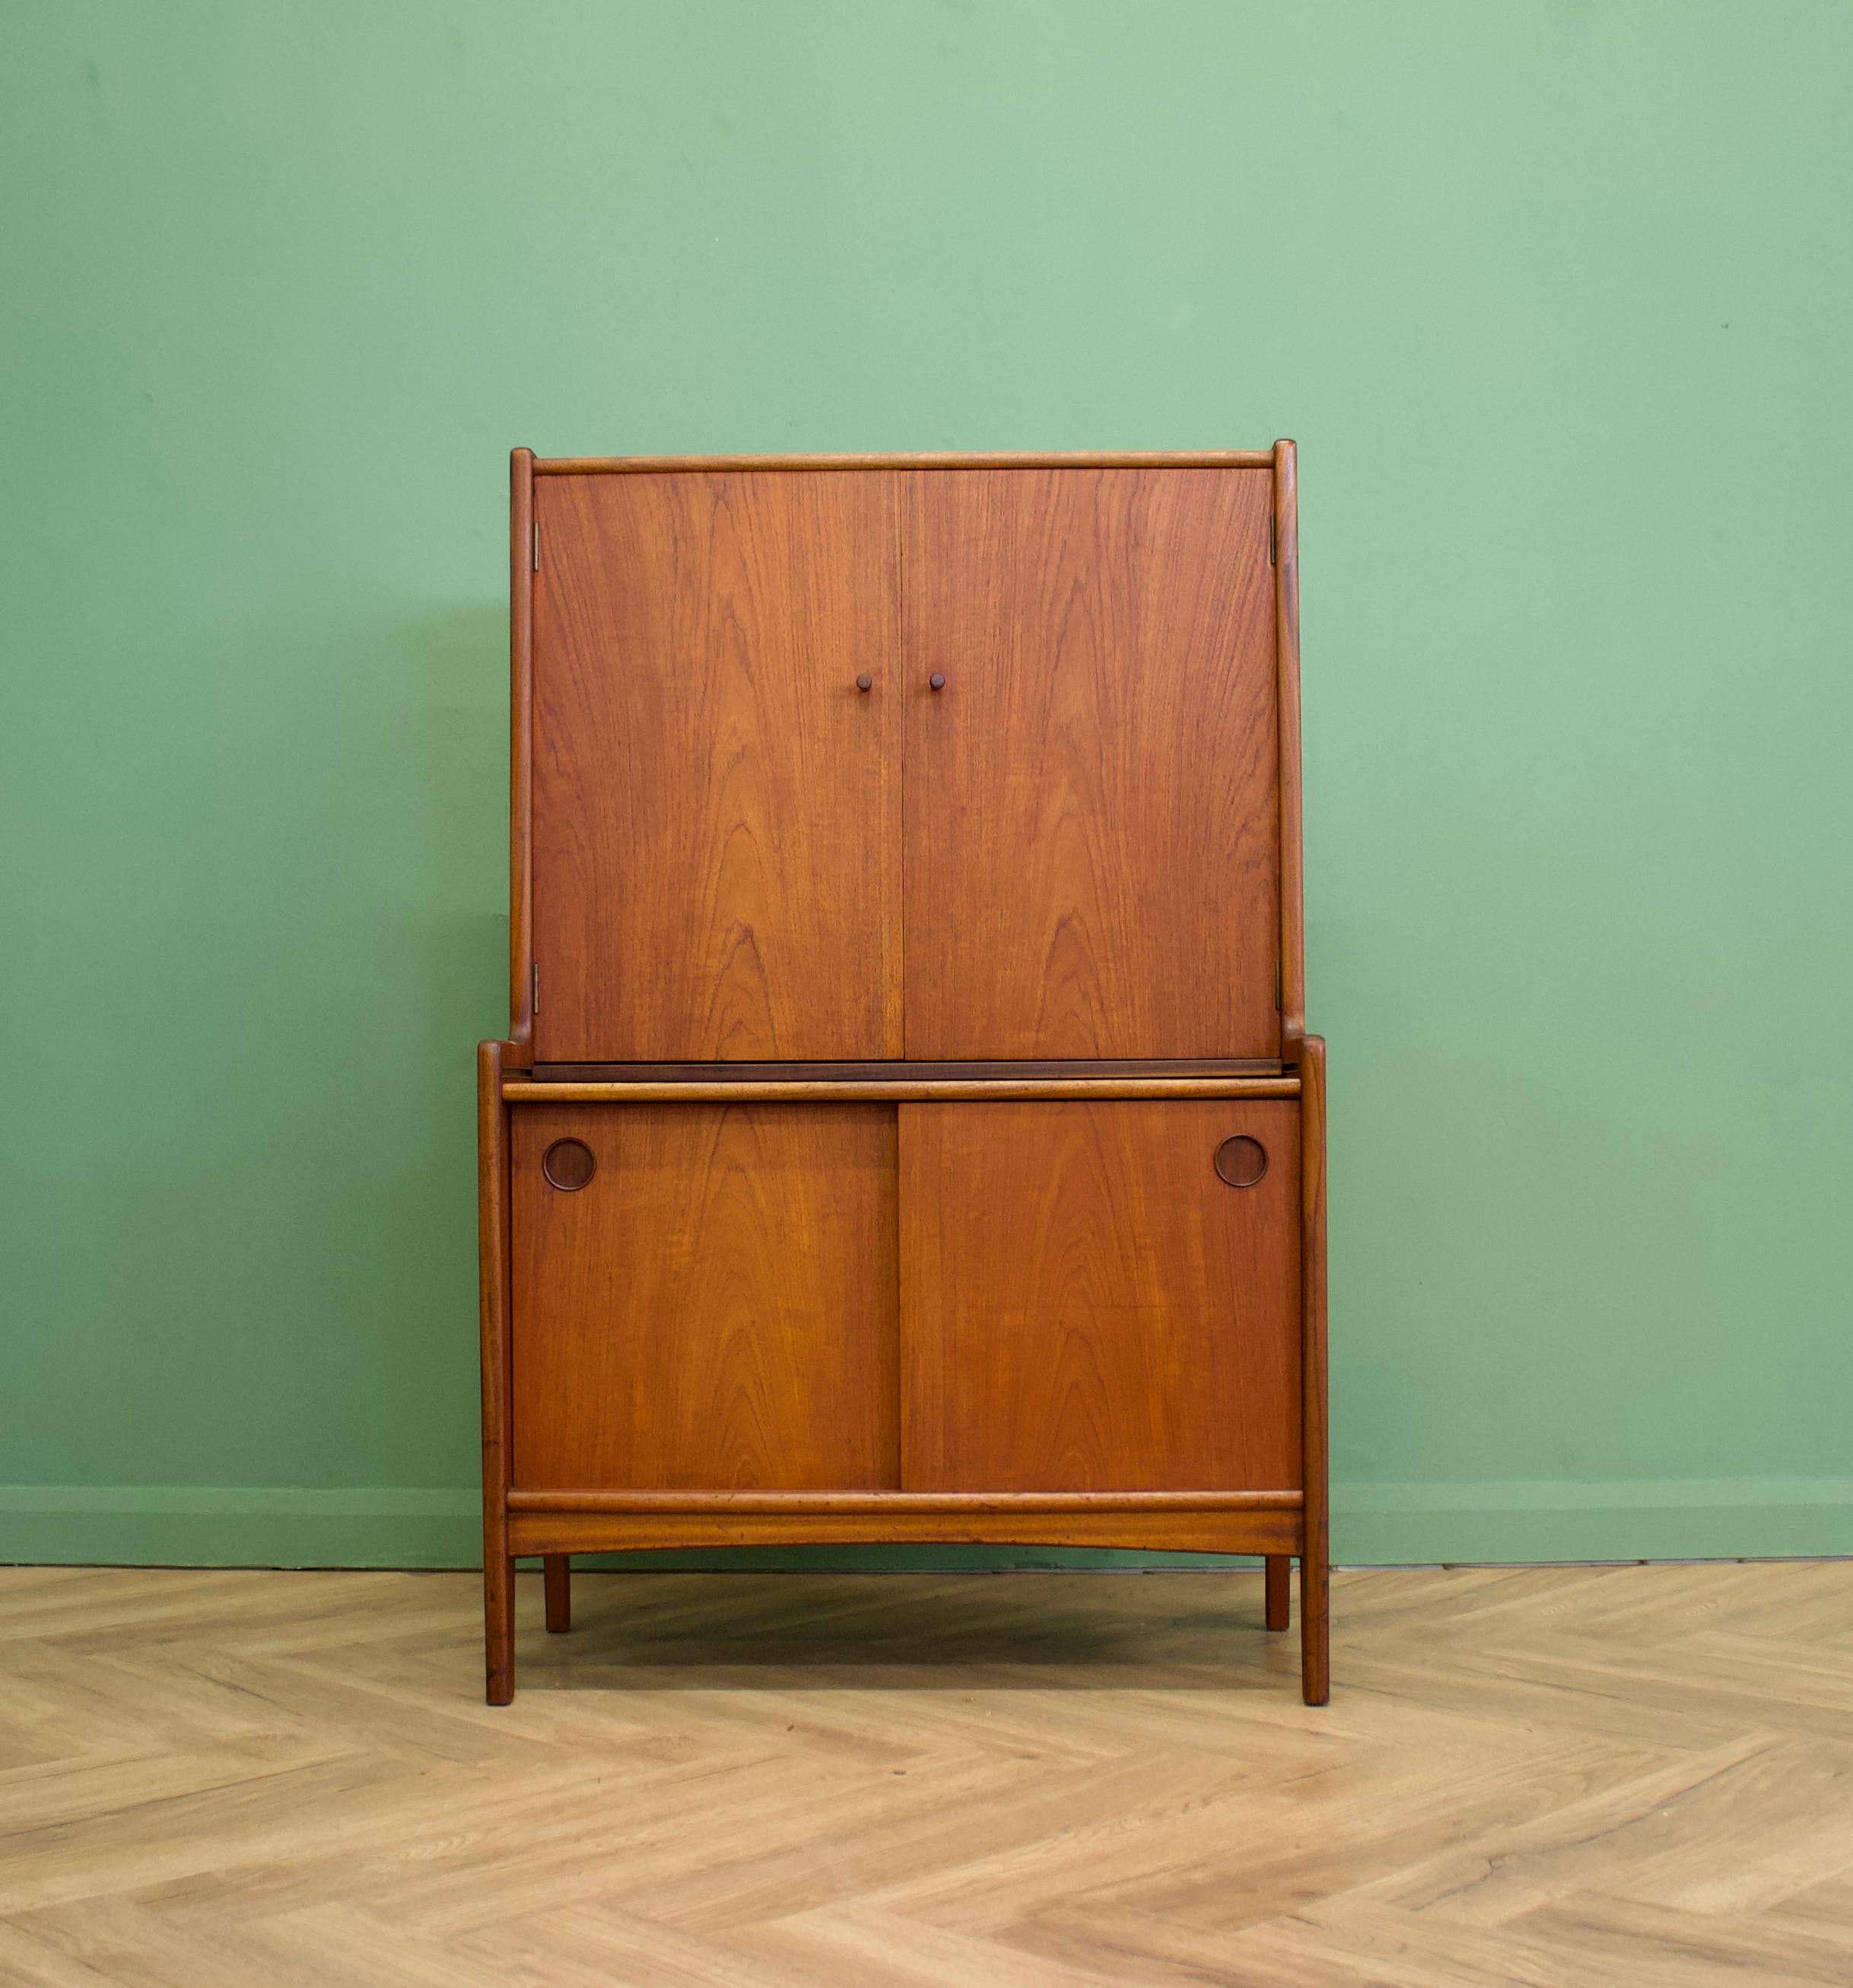 - Midcentury drinks cabinet / dry bar / sideboard.
- Manufactured in the UK by Younger
- Made from teak and teak veneer.